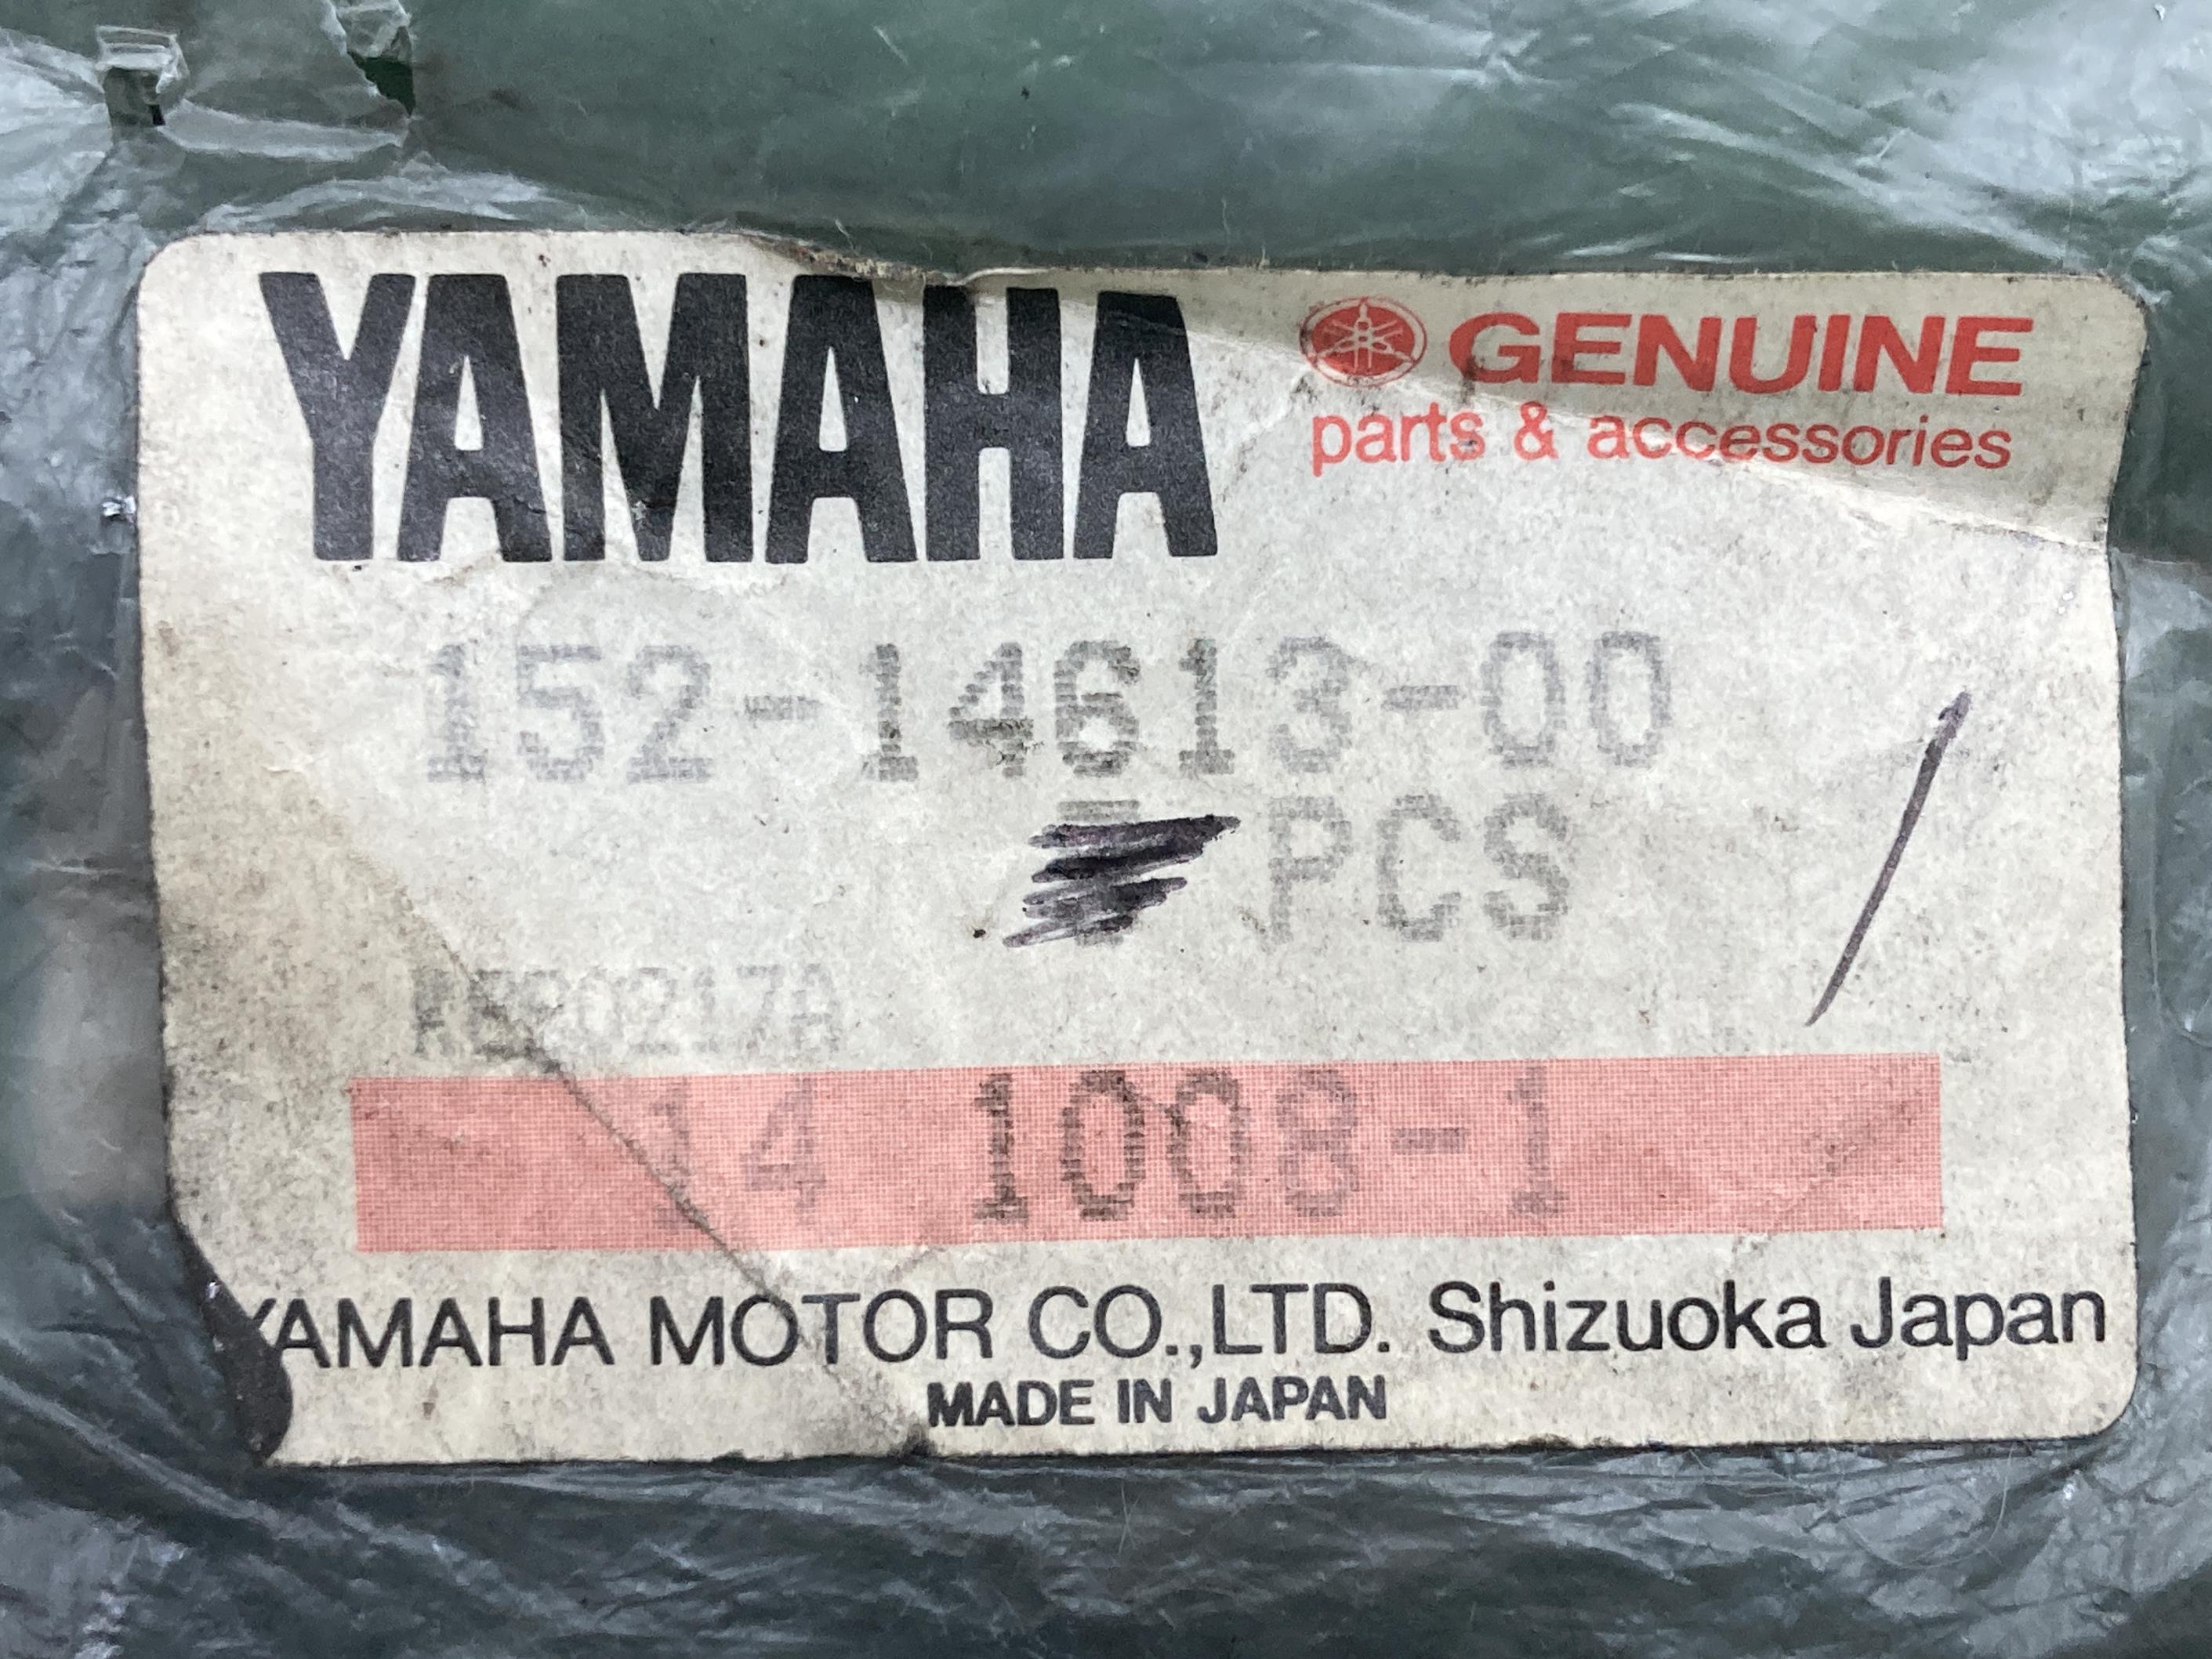 TZR125 exhaust pipe gasket Yamaha original new goods bike parts DT230 Lanza RD250 TDR125 stock equipped immediate payment possible vehicle inspection "shaken" Genuine DT200R